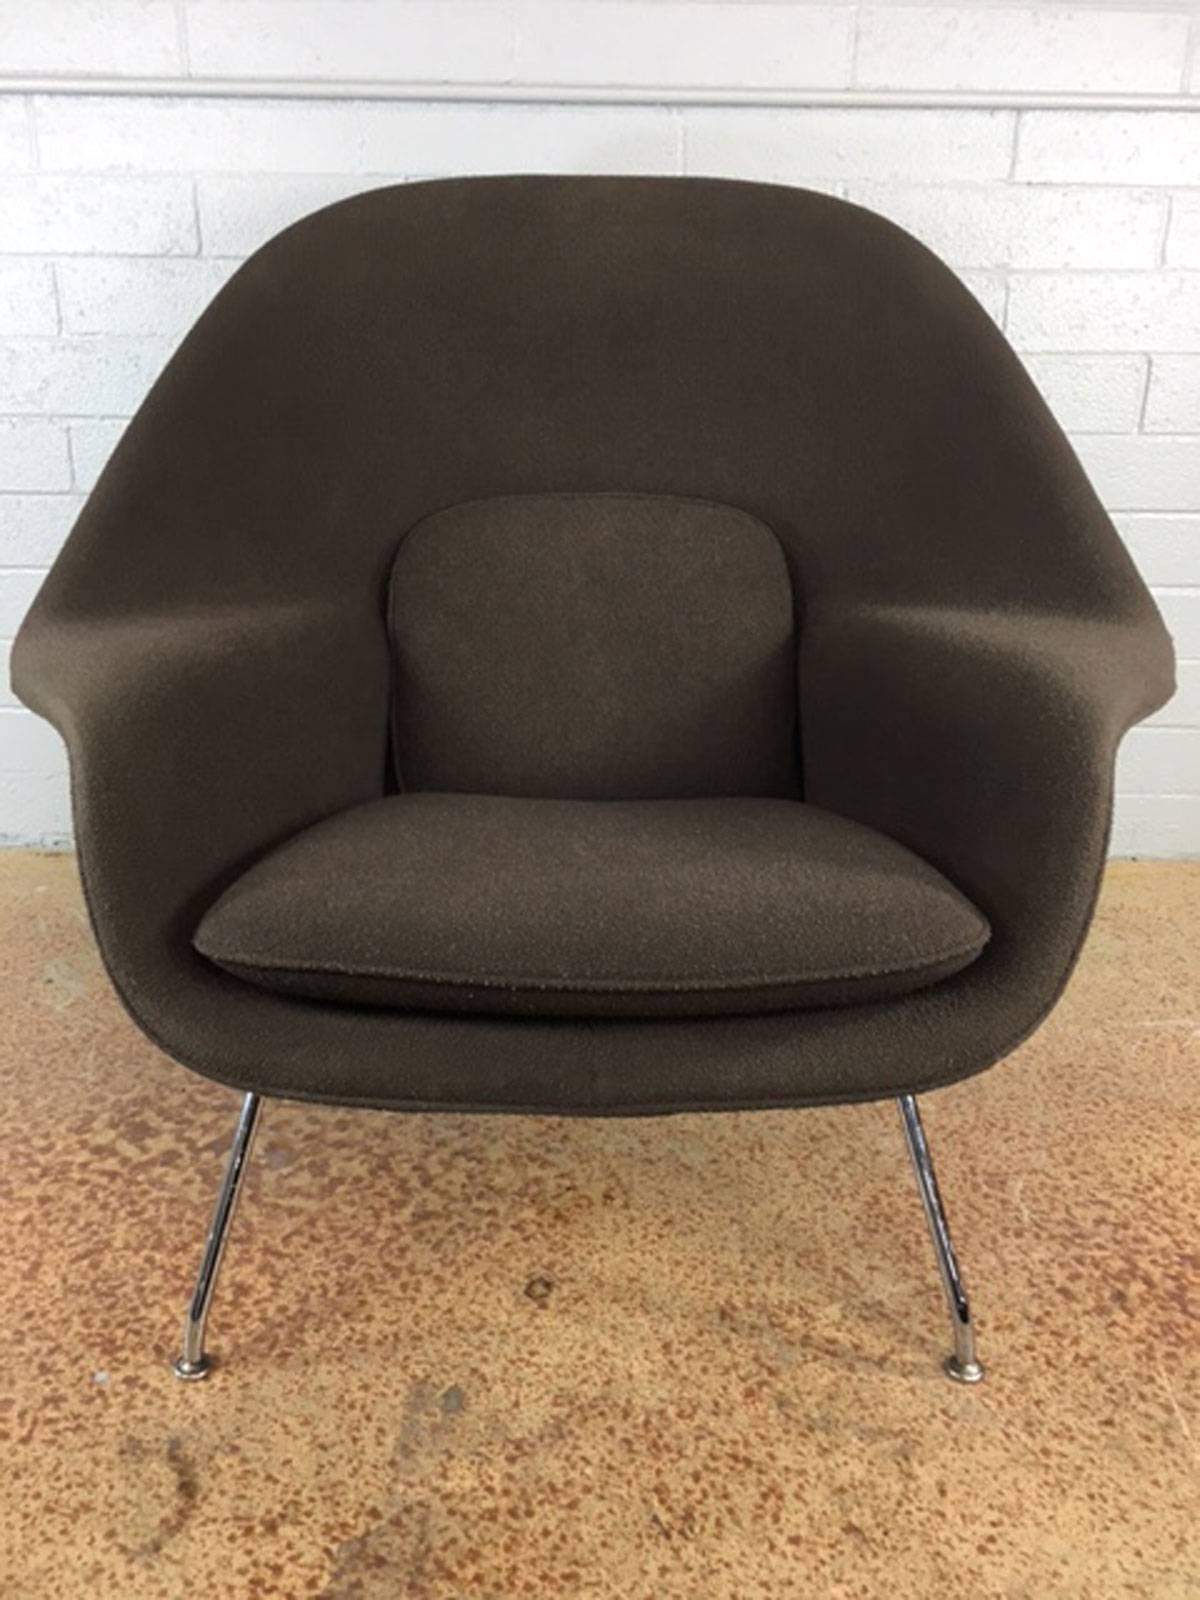 Saarinen's womb lounge chair in a rich, chocolate brown textural fabric. No rips, tears, holes, or unusual and noticeable wear. 

One chair in stock.